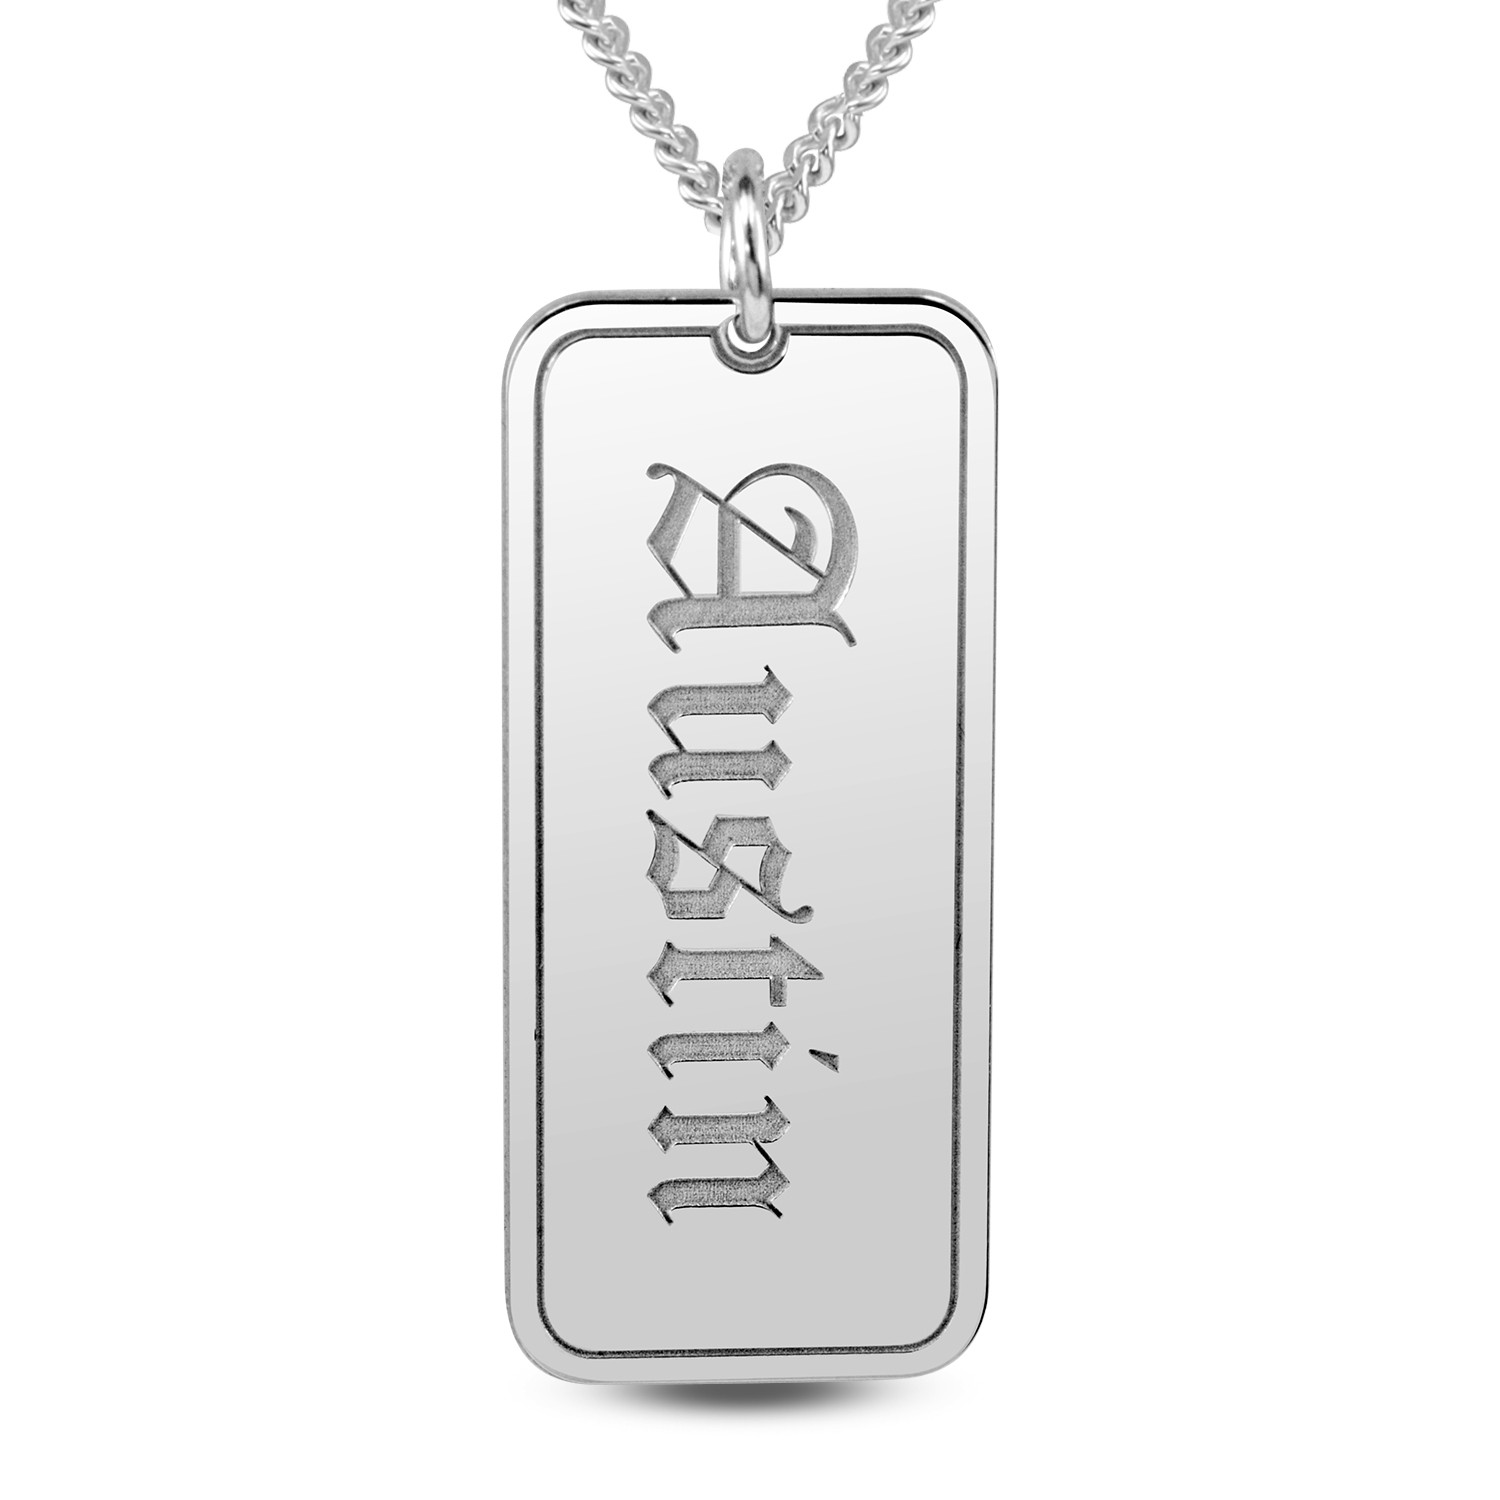 Sterling Silver Custom Engraved Dog Tag Pendant Necklace | Personalized Inscription